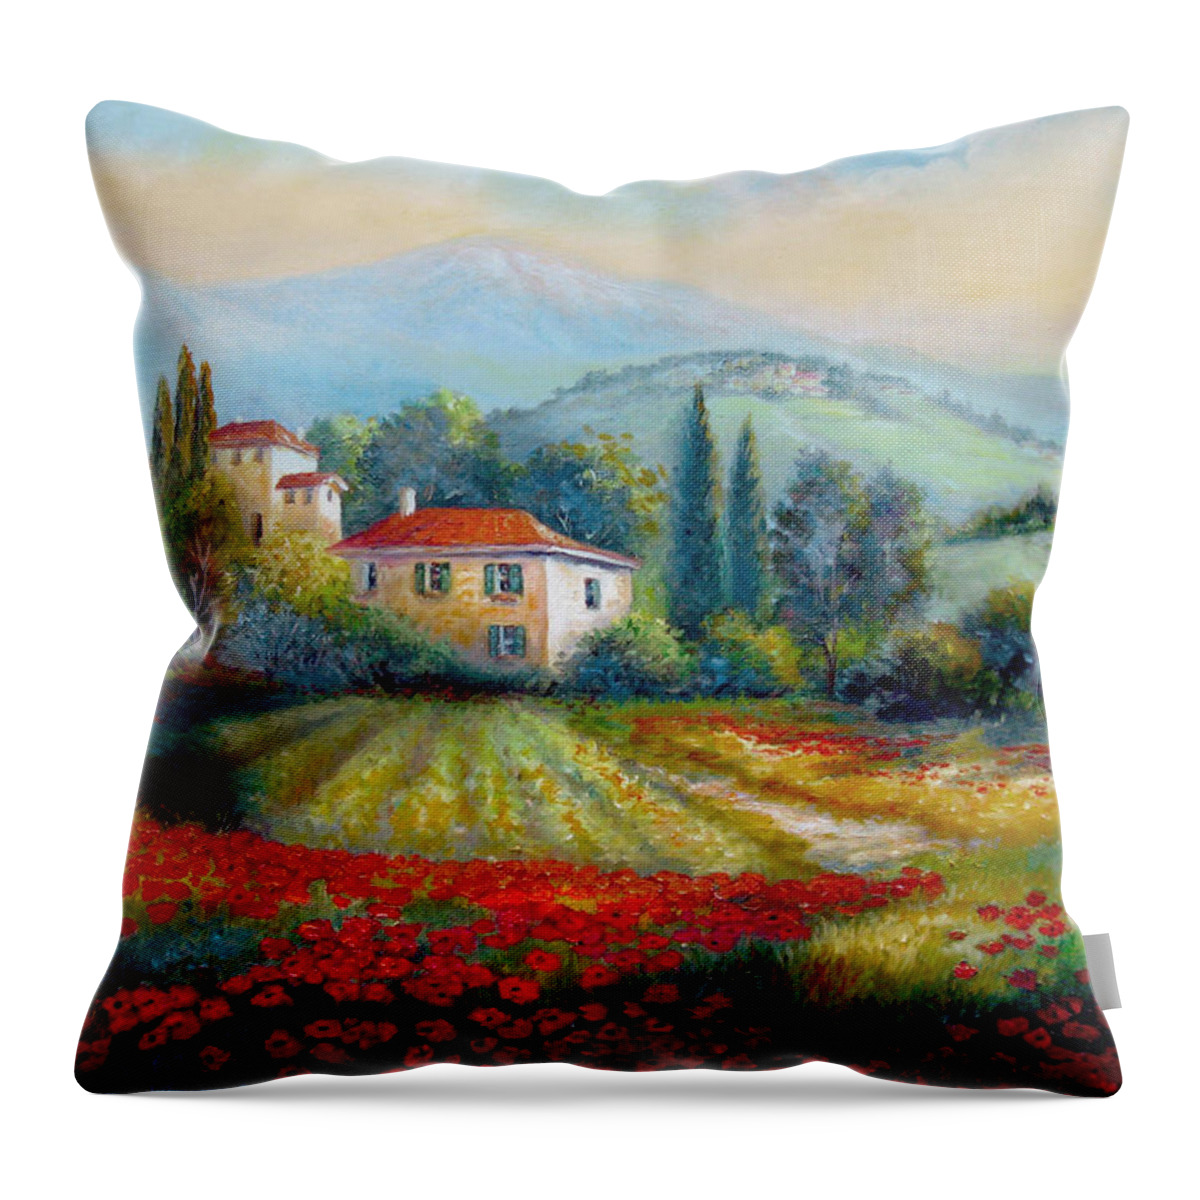  Mediterranean Landscape Throw Pillow featuring the painting Poppy fields of Italy by Regina Femrite